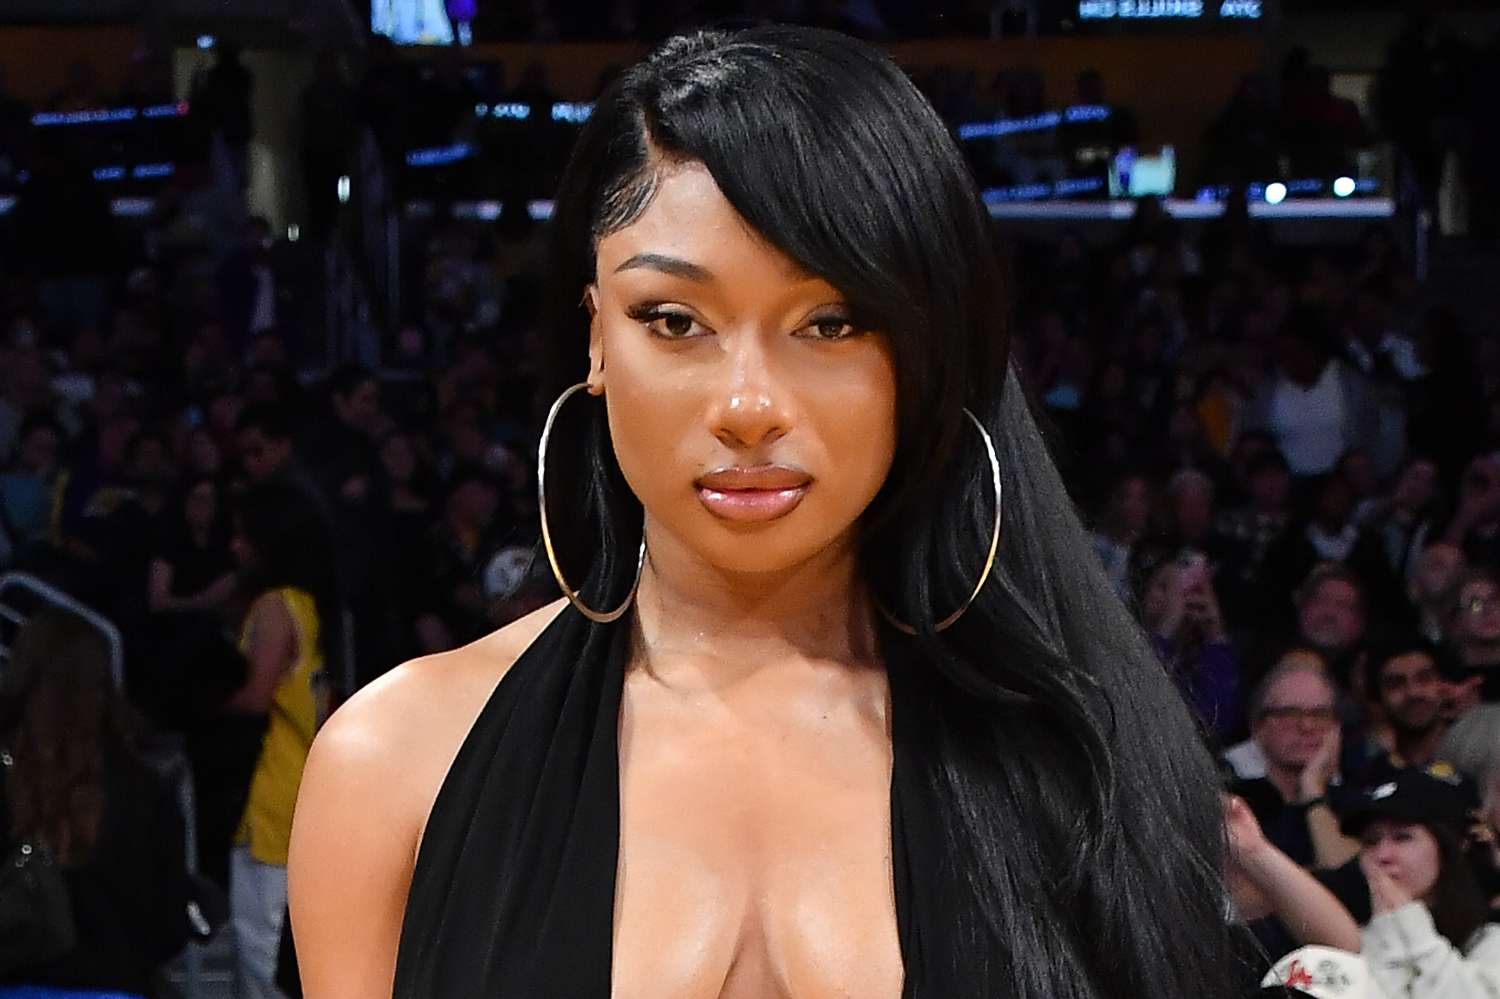 Megan Thee Stallion Wishes Her Mom 'Would've Talked to a Therapist' Before Her Death to 'Lessen That Load'